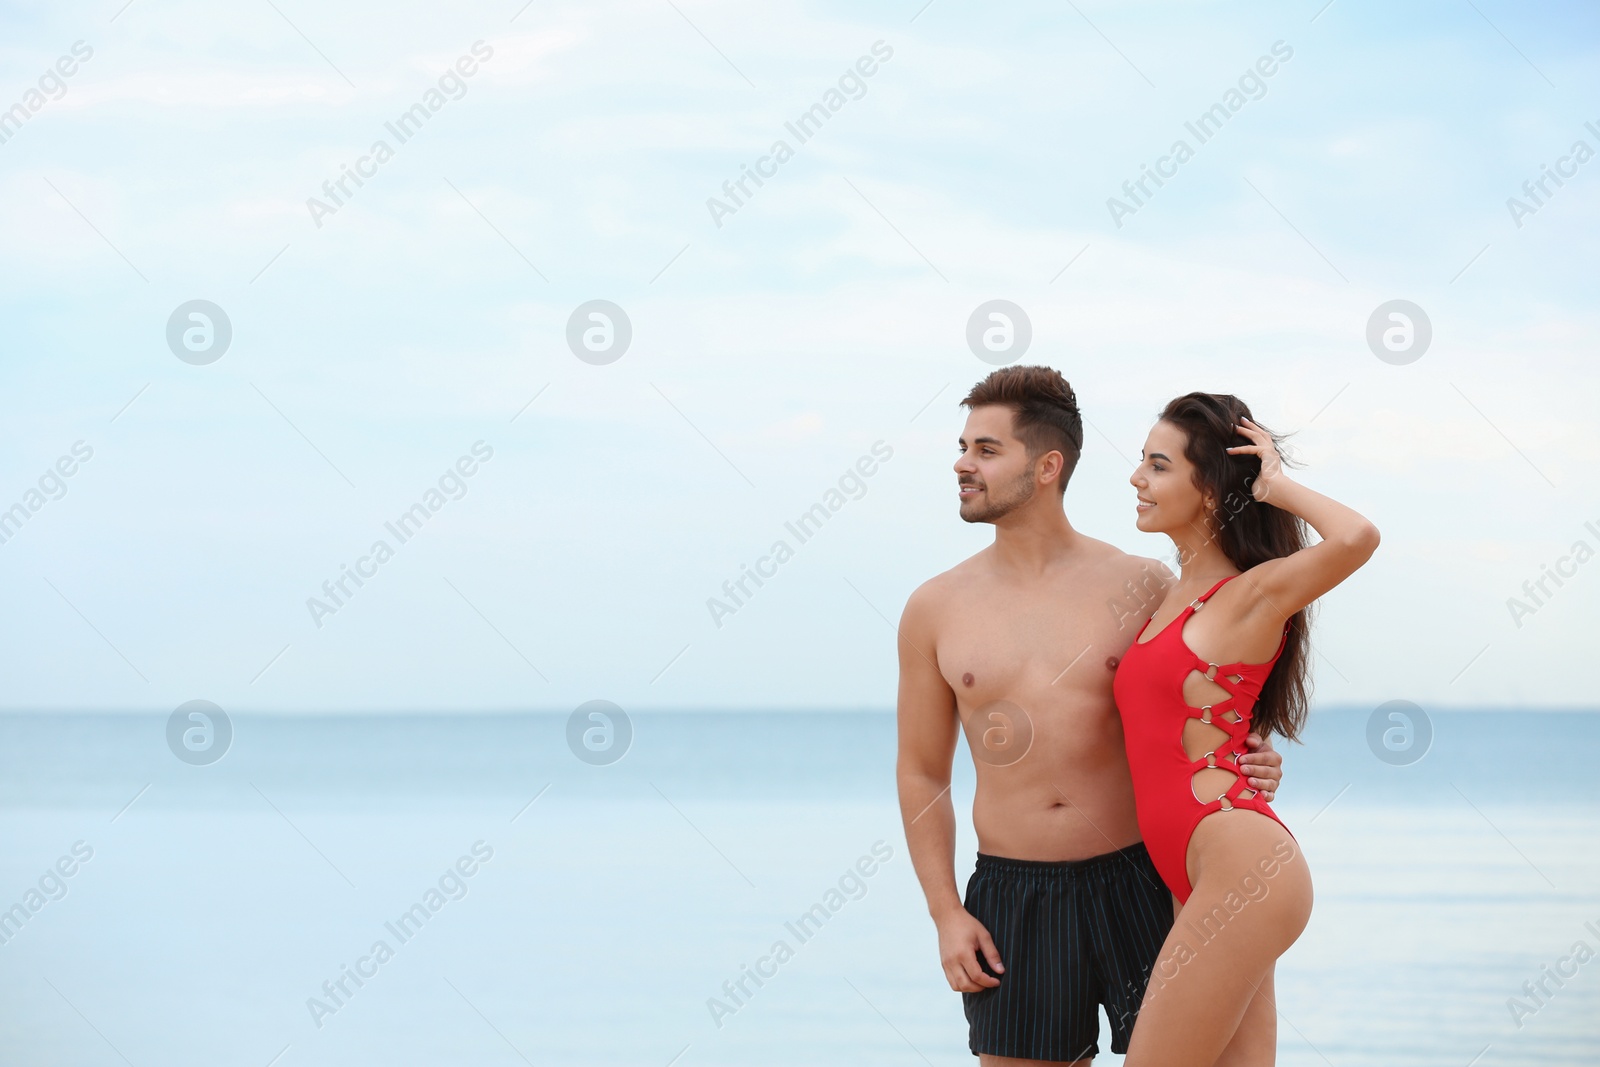 Photo of Happy young couple spending time together on beach